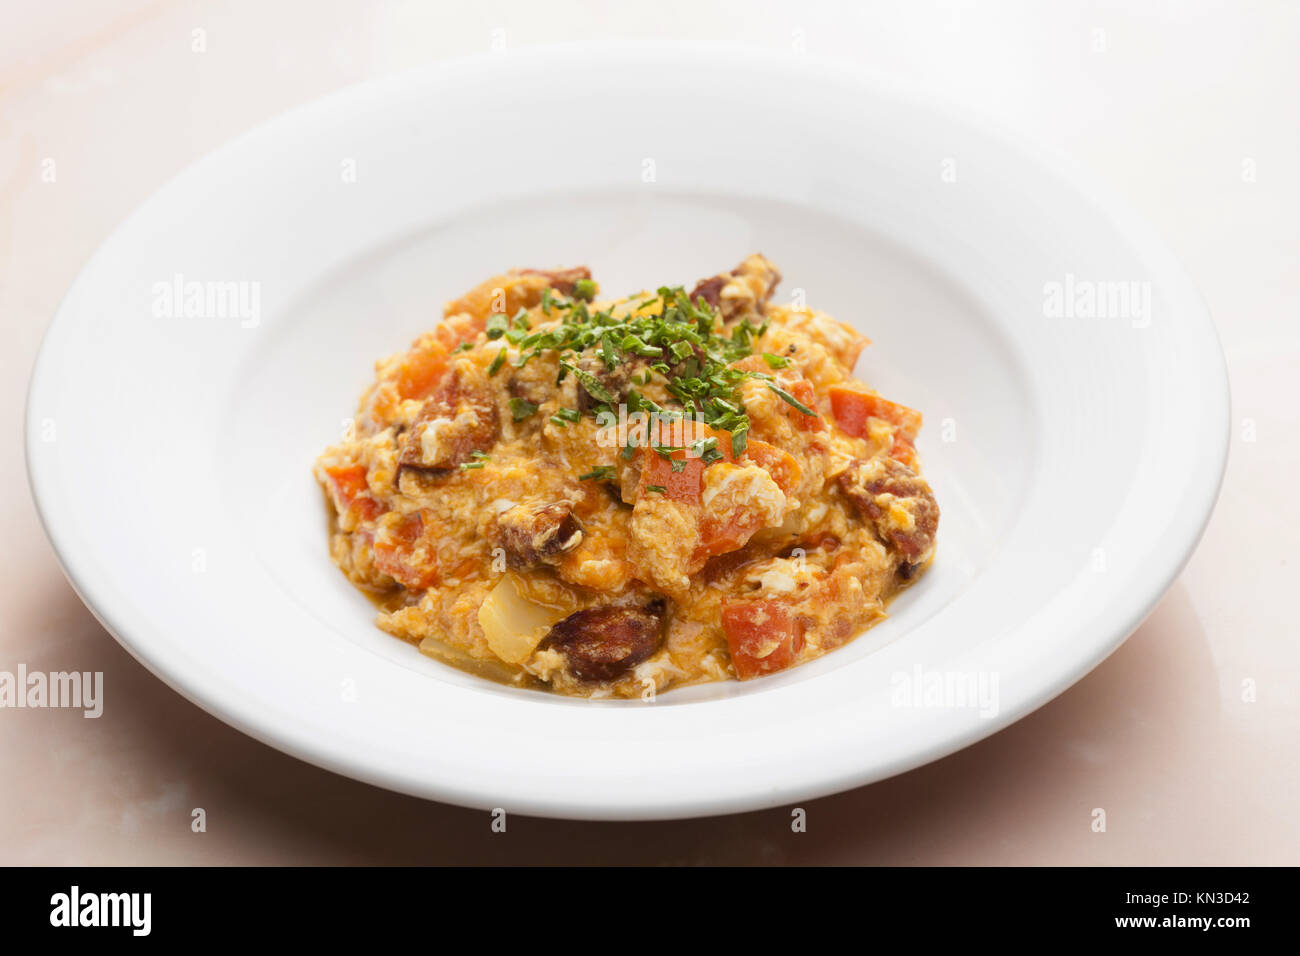 meal called leco (mixture of vegetables and eggs with sausage). Stock Photo